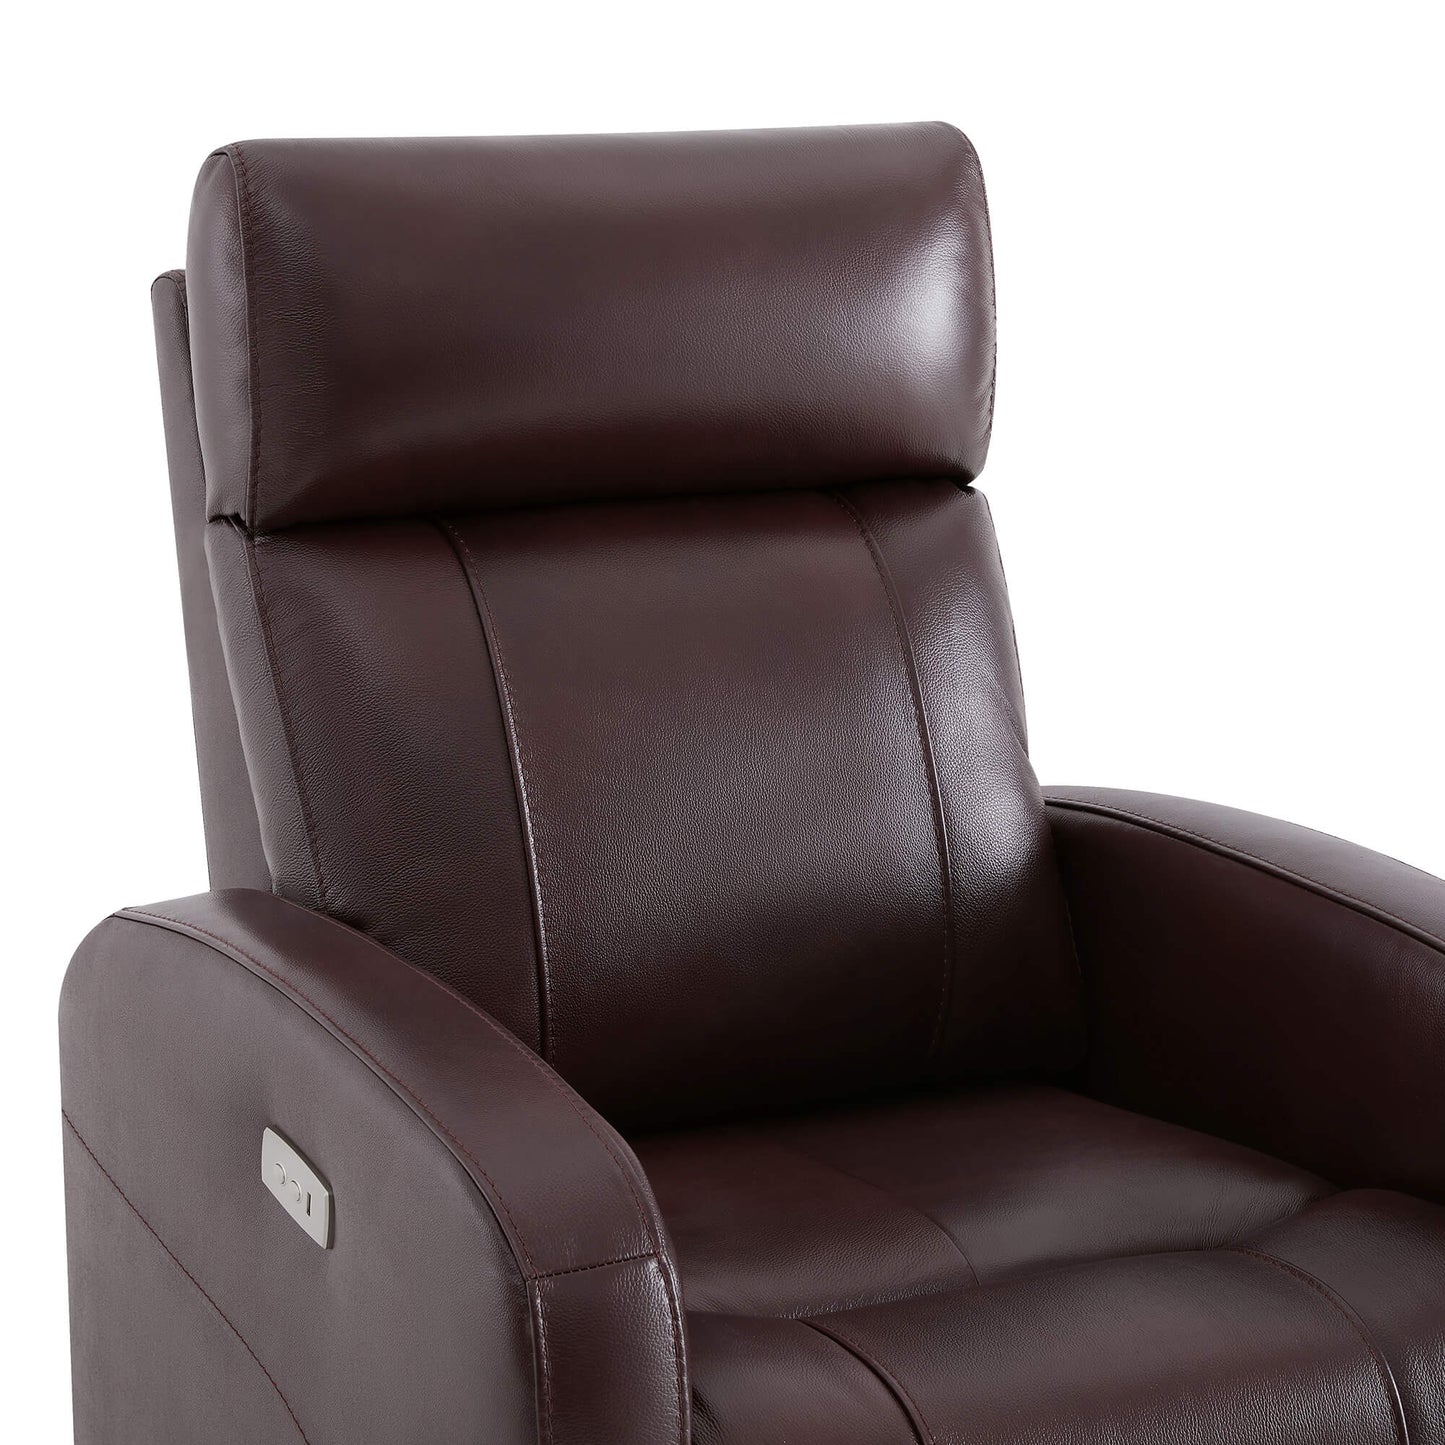 CHITA LIVING-Joy Power Swivel Recliner with Manual Headrest-Recliners-Genuine Leather-Cognac-